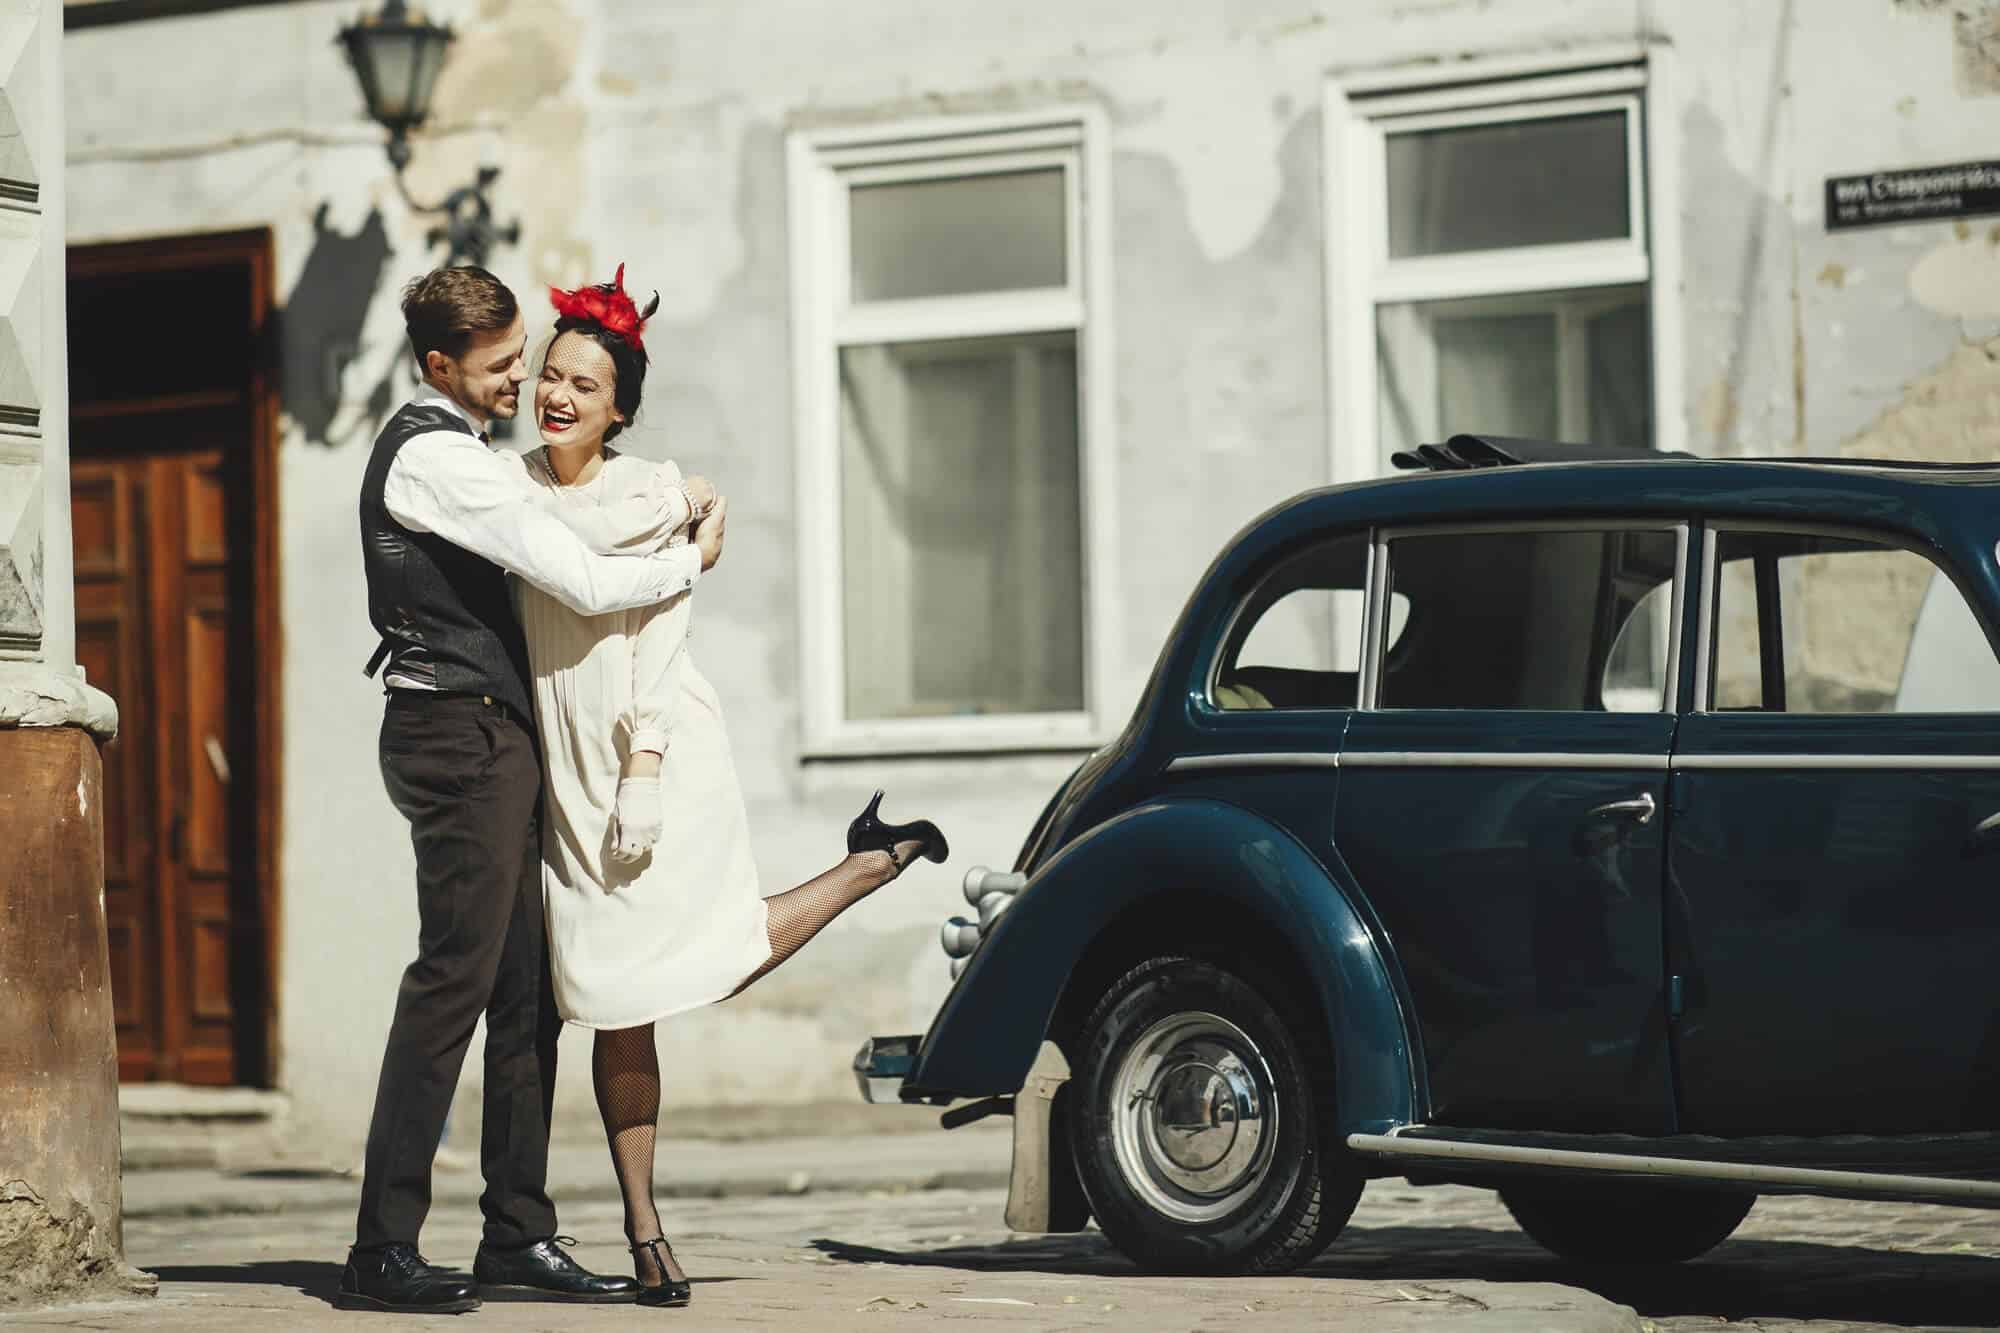 Vintage-themed-wedding-Amazing-destinations-that-couples-should-consider-2.